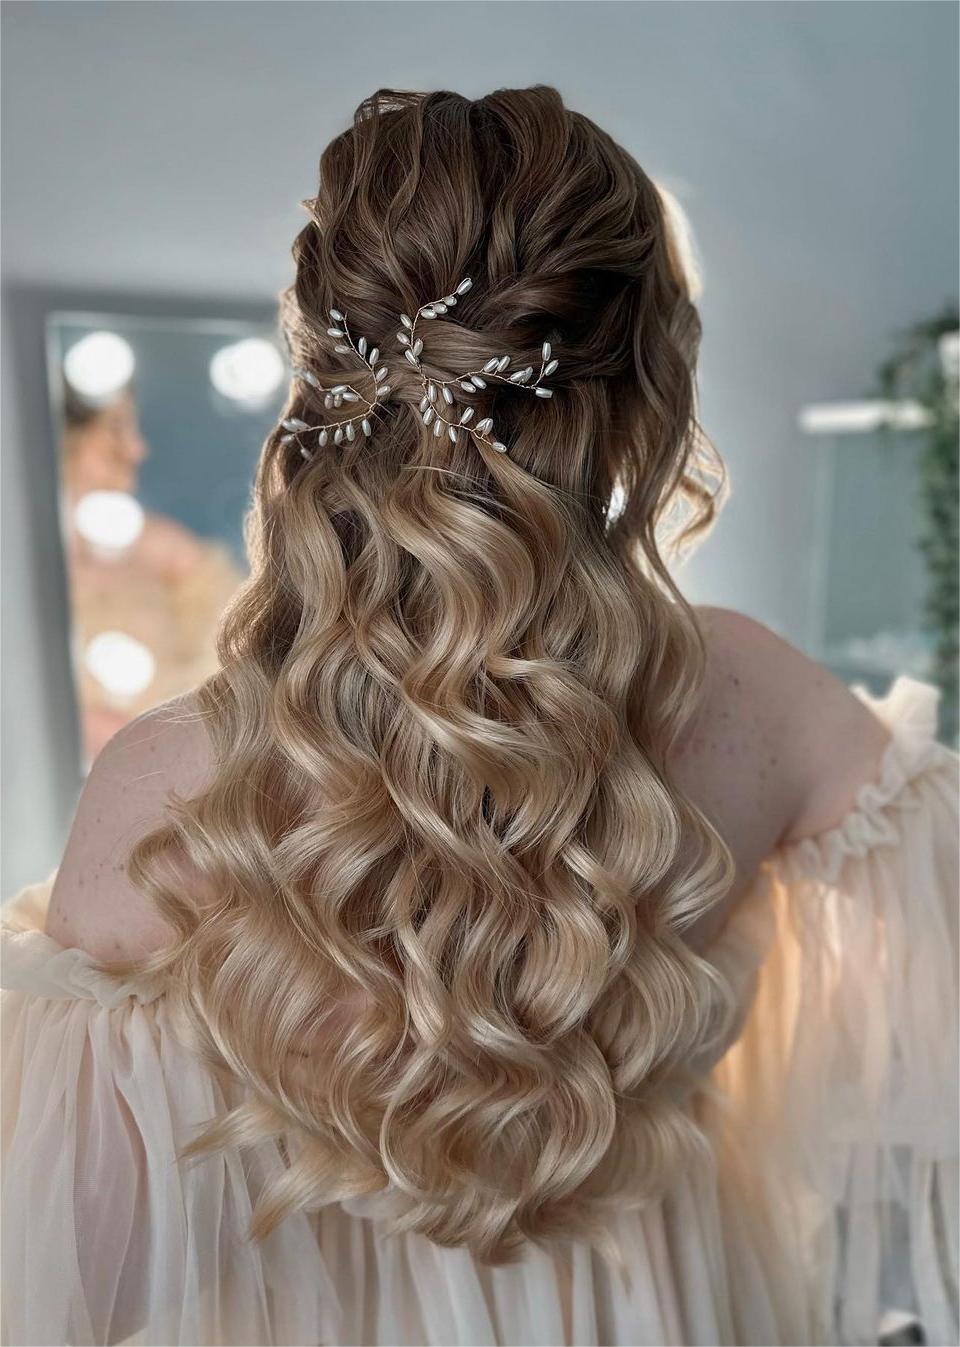 ombre braided half up half down long prom hairstyle via mariiahairstylist